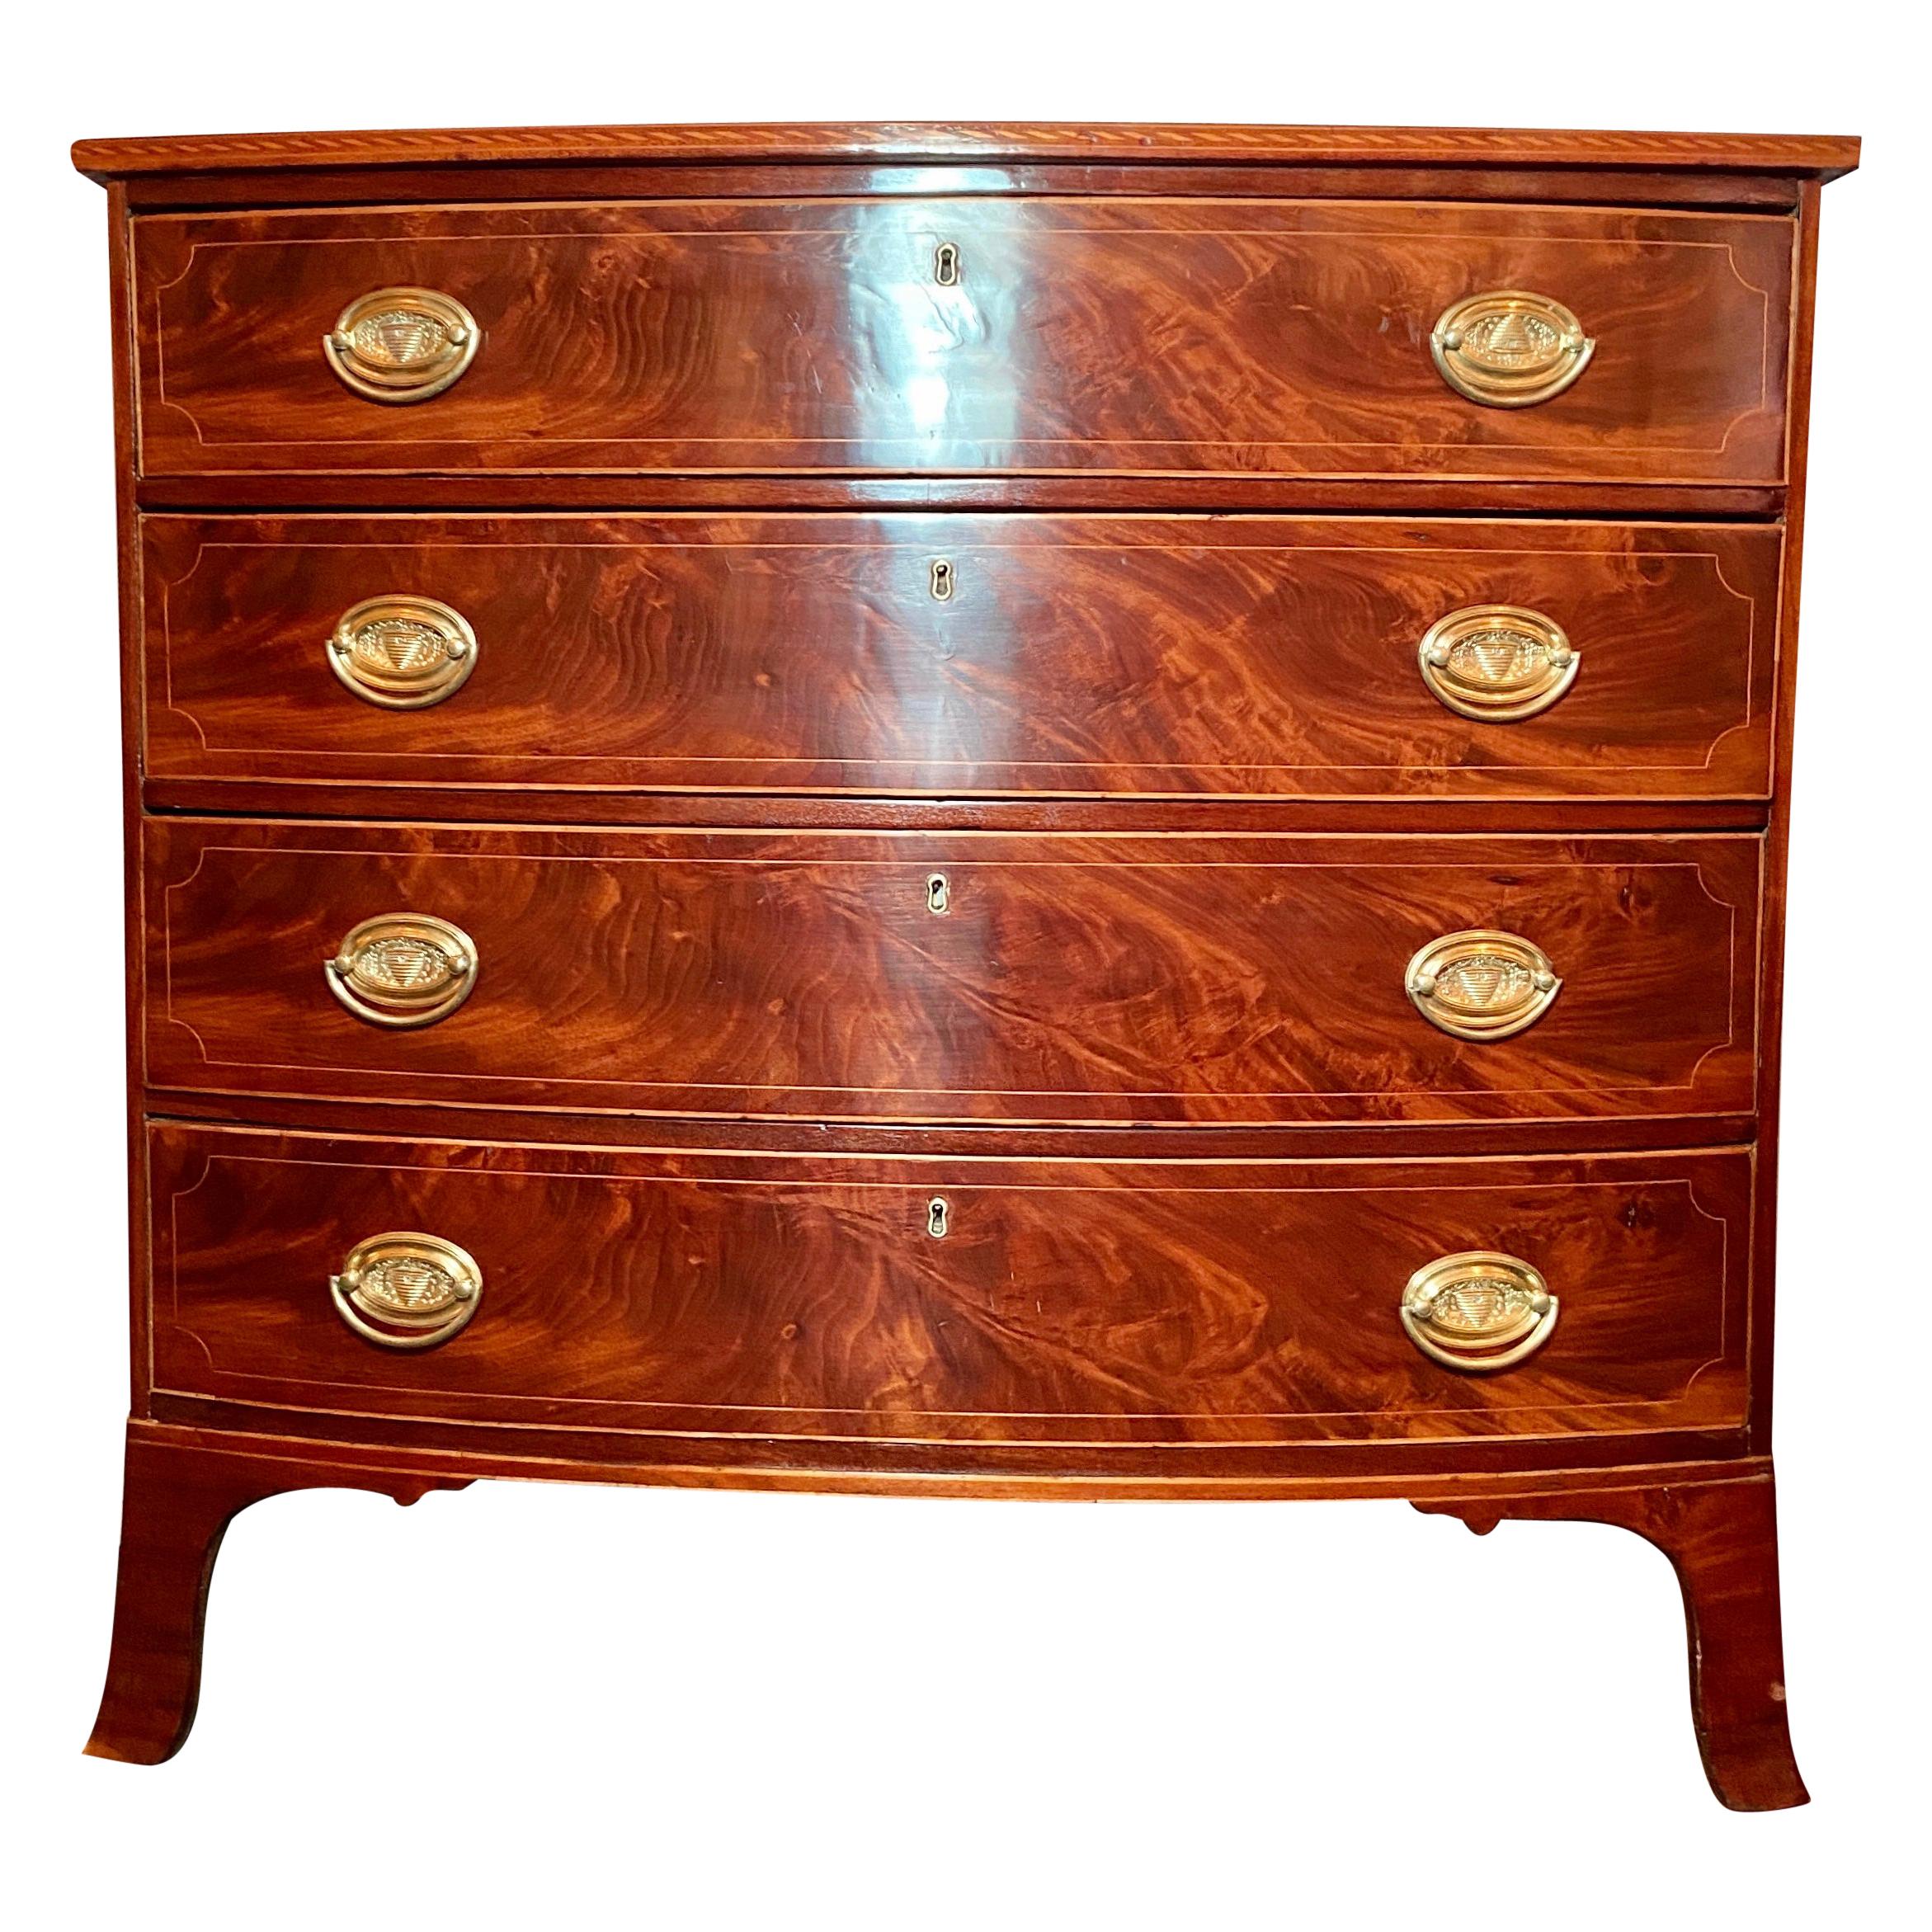 Antique English Sheraton Period Bow-Front Chest of Drawers, circa 1810-1820